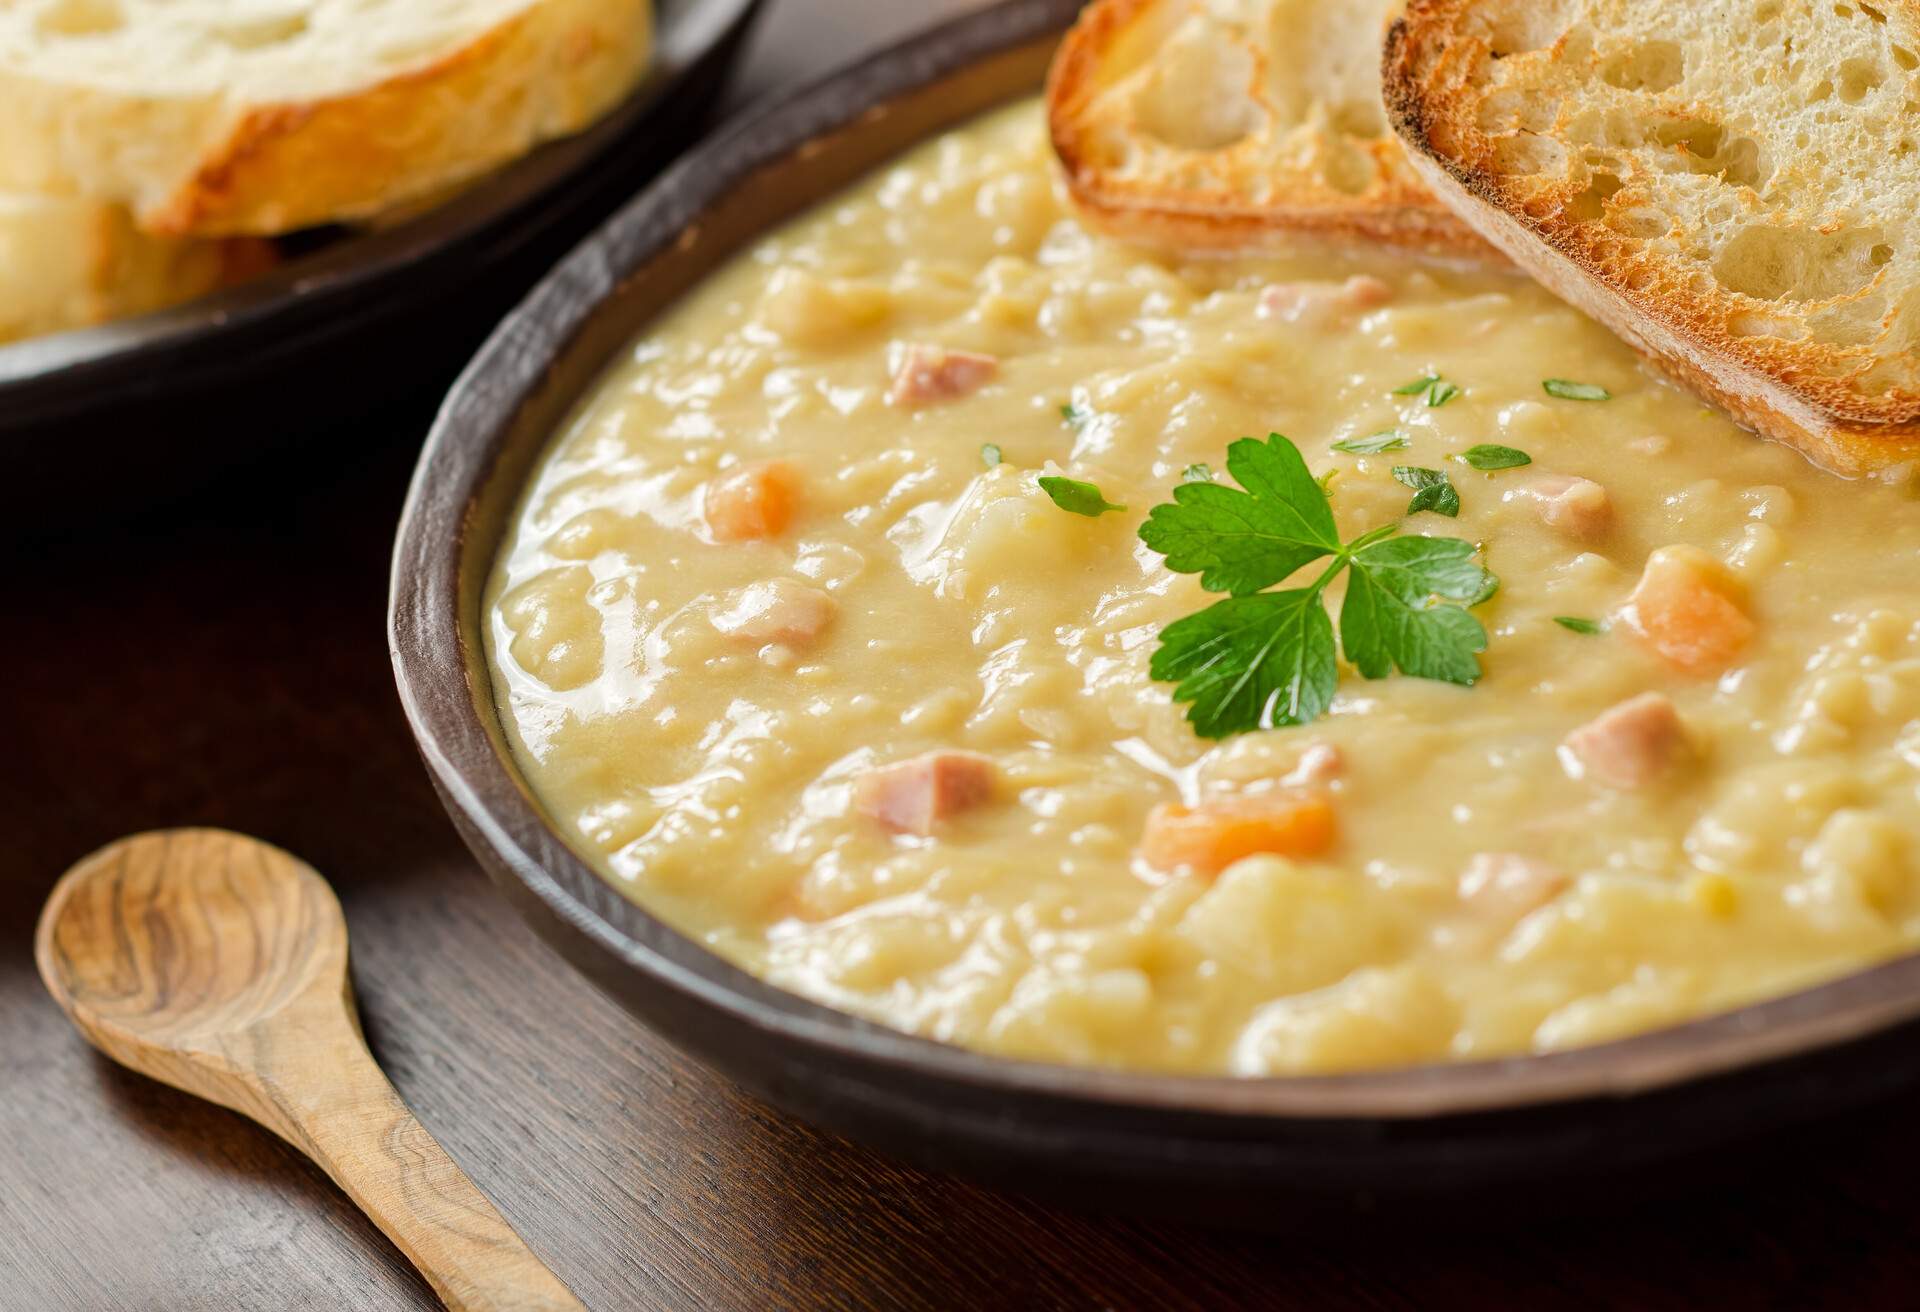 A rustic bowl of hearty spit pea soup with smoked ham, carrots, potato, and french bread.